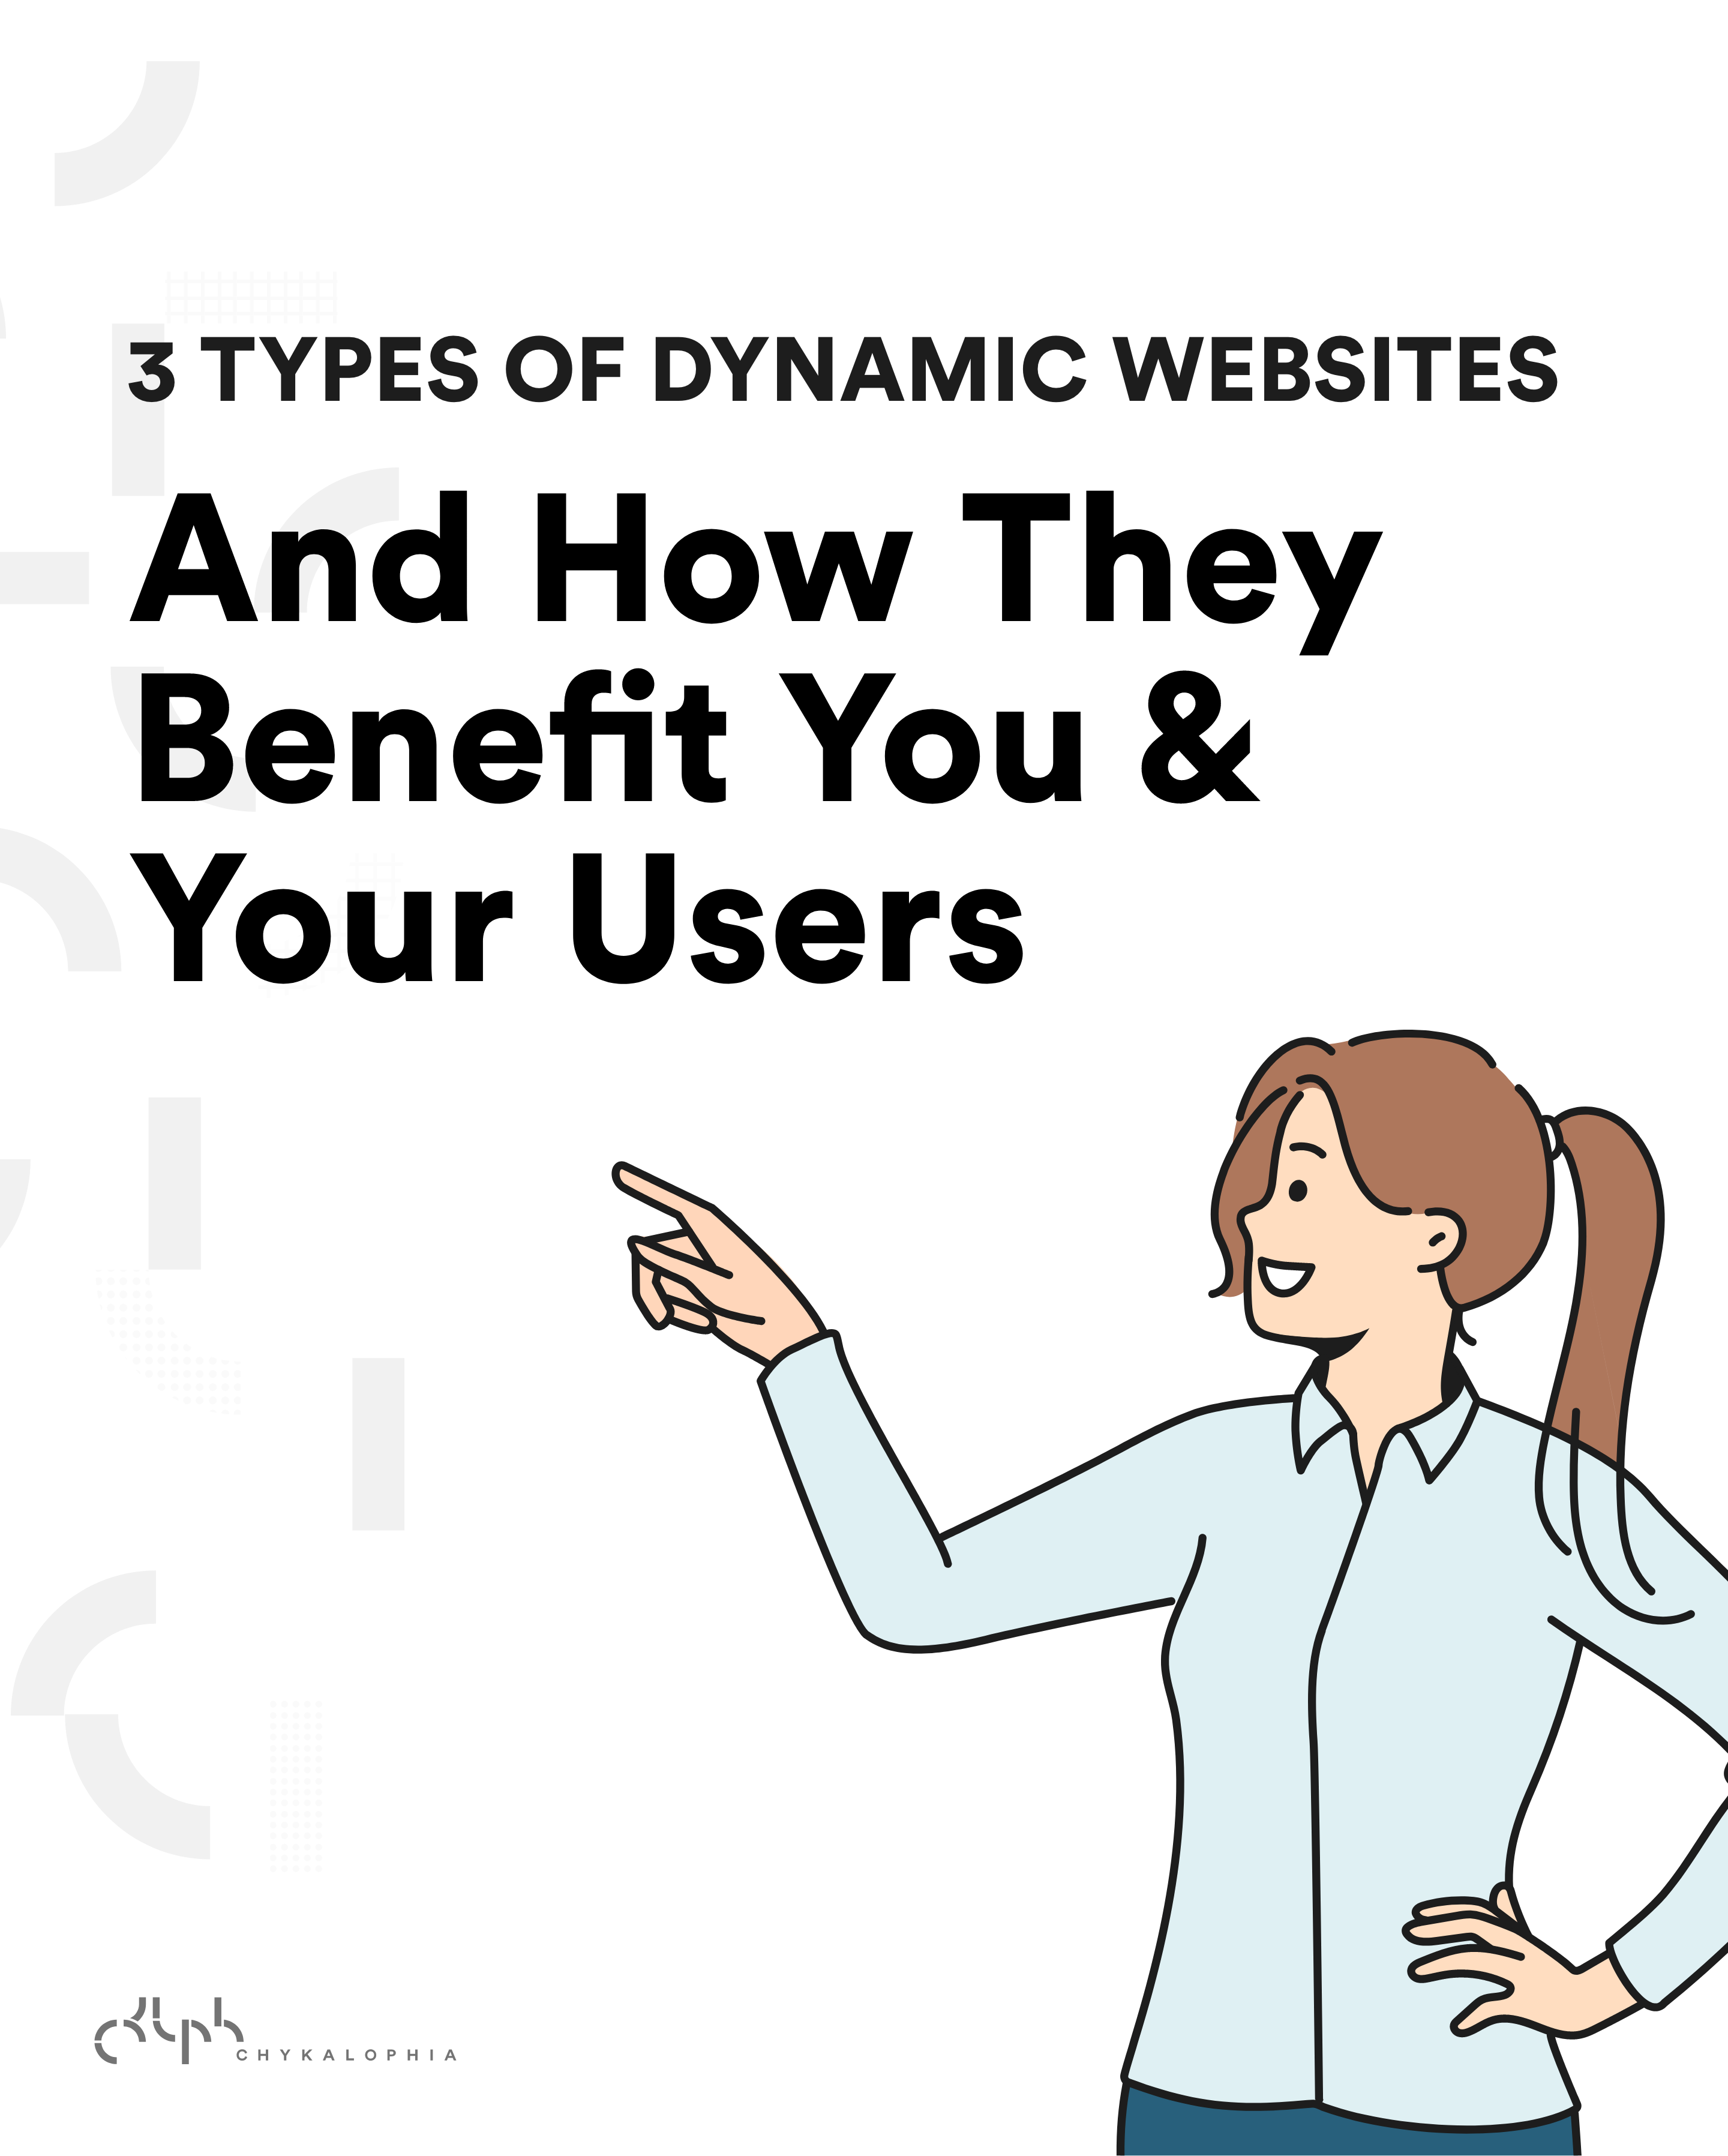 Dynamic website explained: Benefits and 3 types of dynamic website